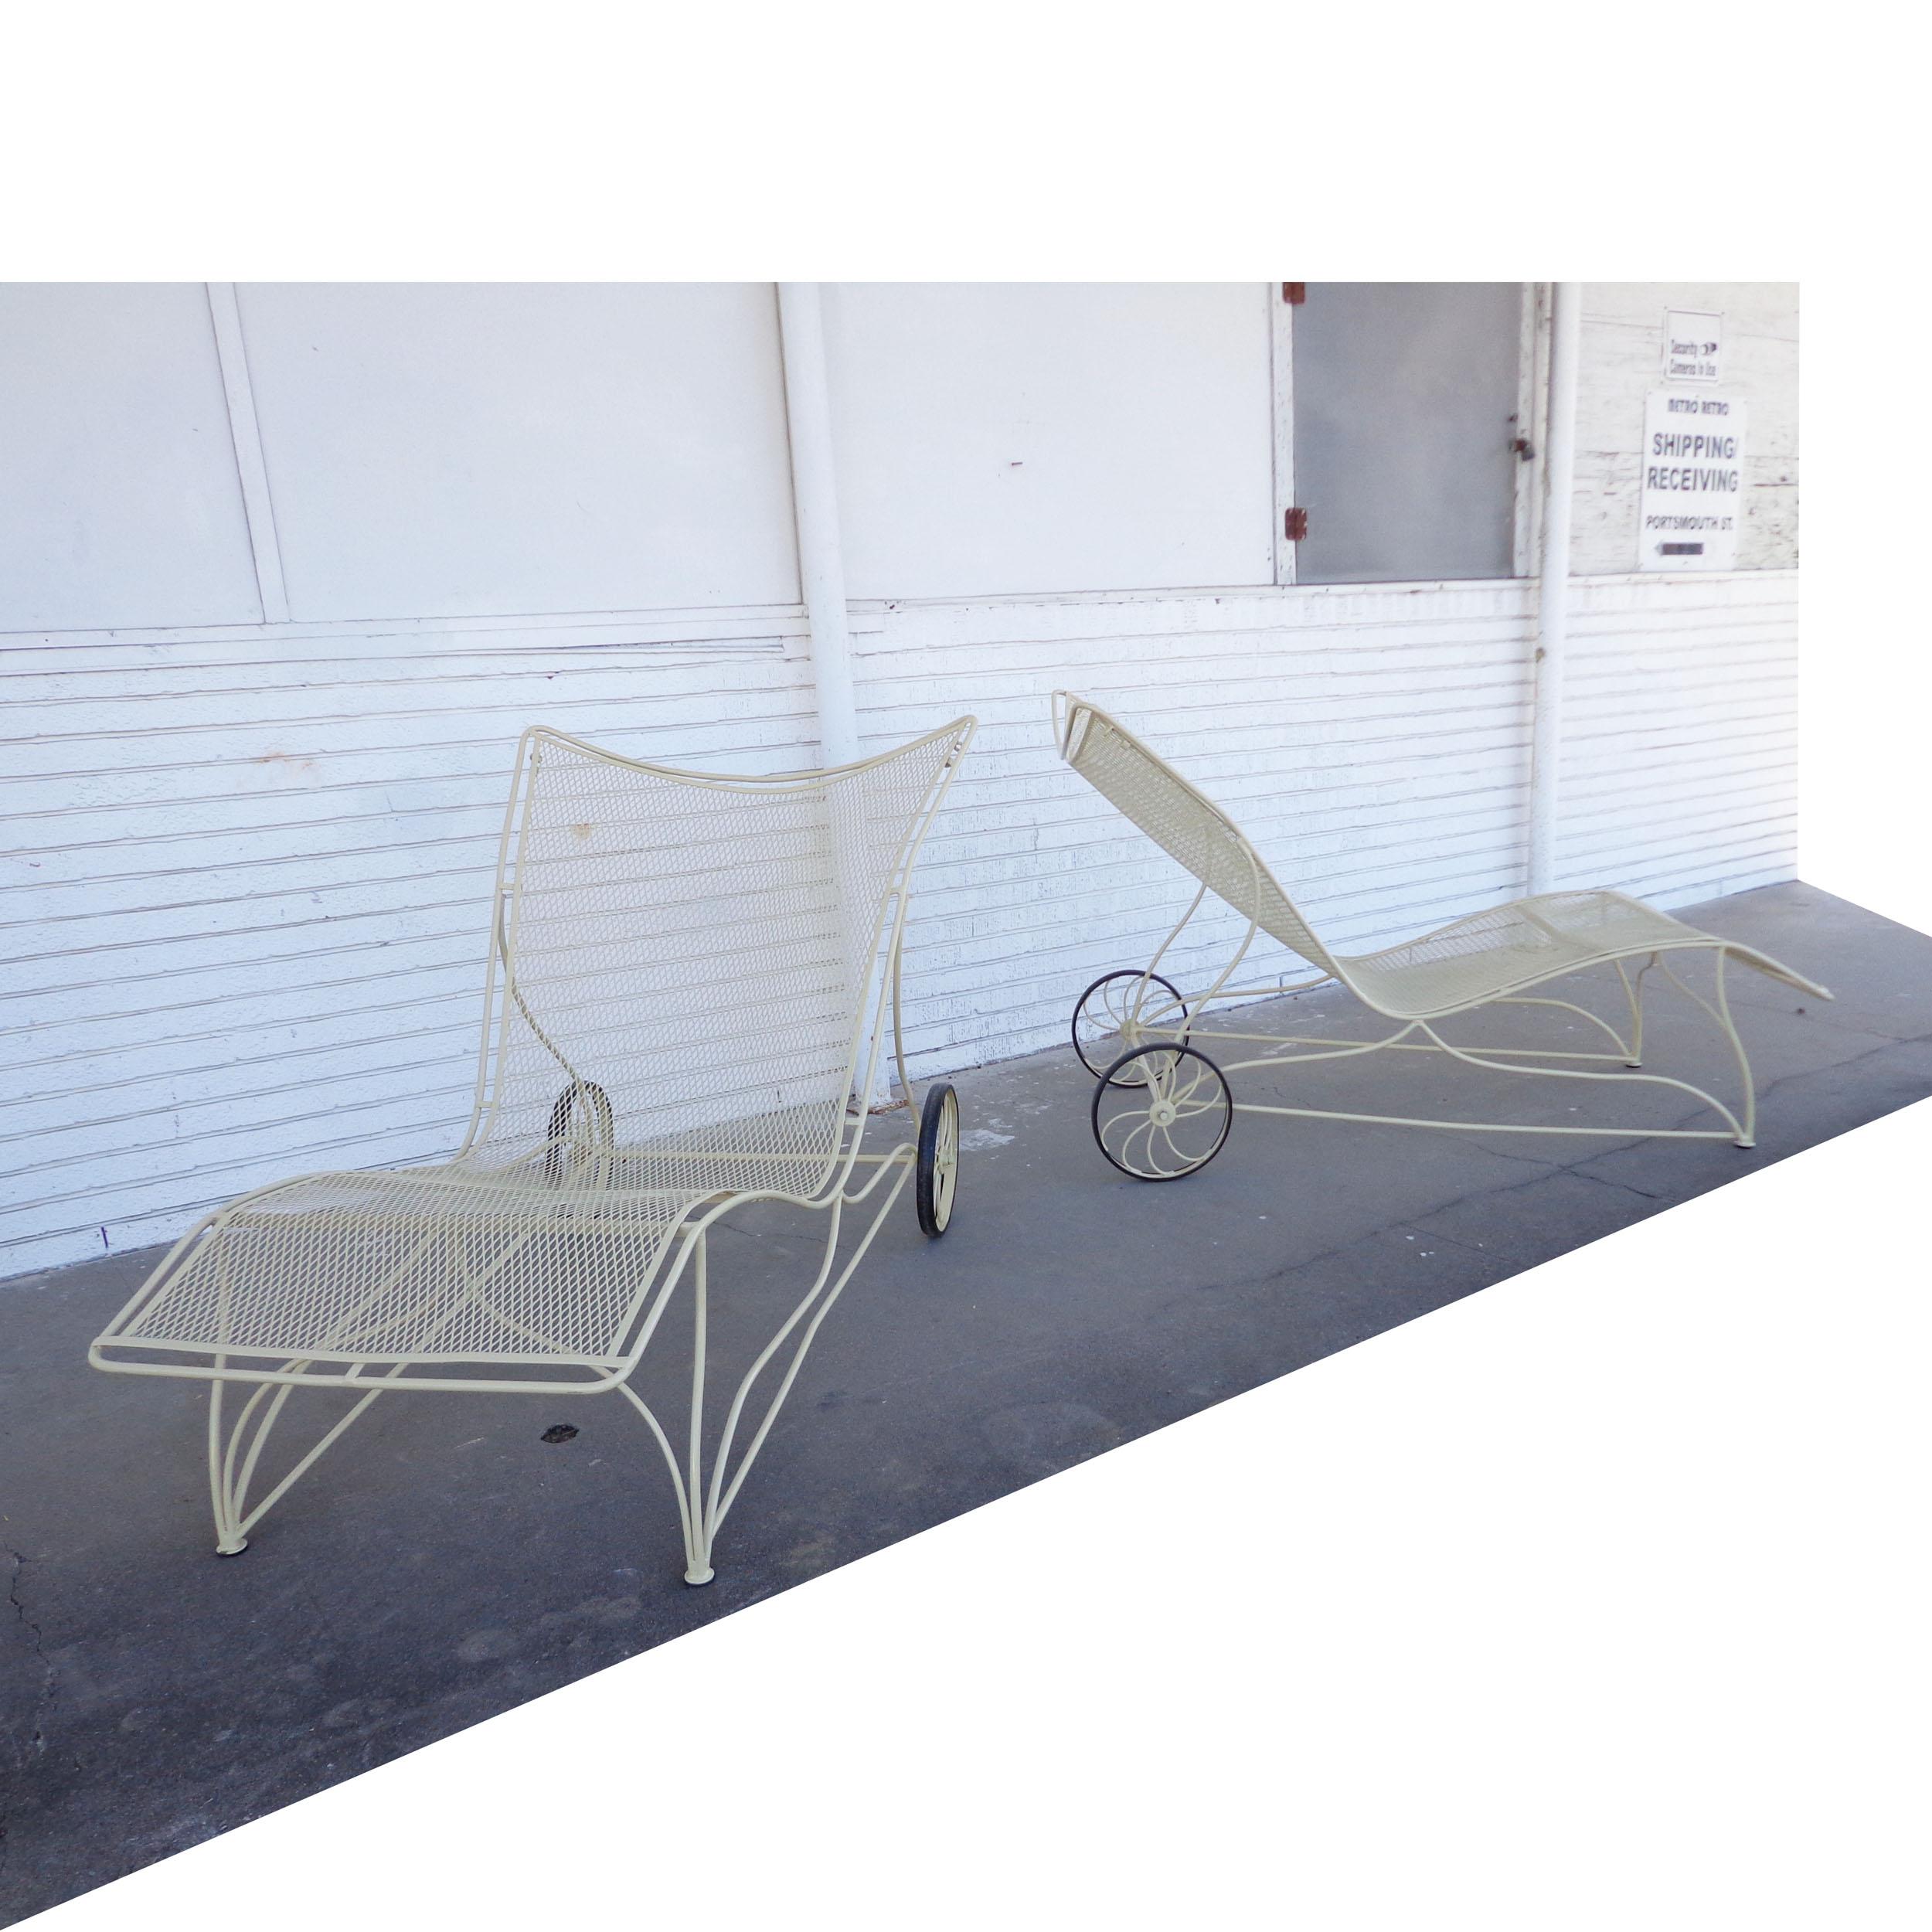 2 Vintage Russell Woodard patio chaises

Rare pair of oversized wrought iron chaise lounges featuring wide frames and wheels. Recently restored in rich buttercream. 
Measurements: 40.5